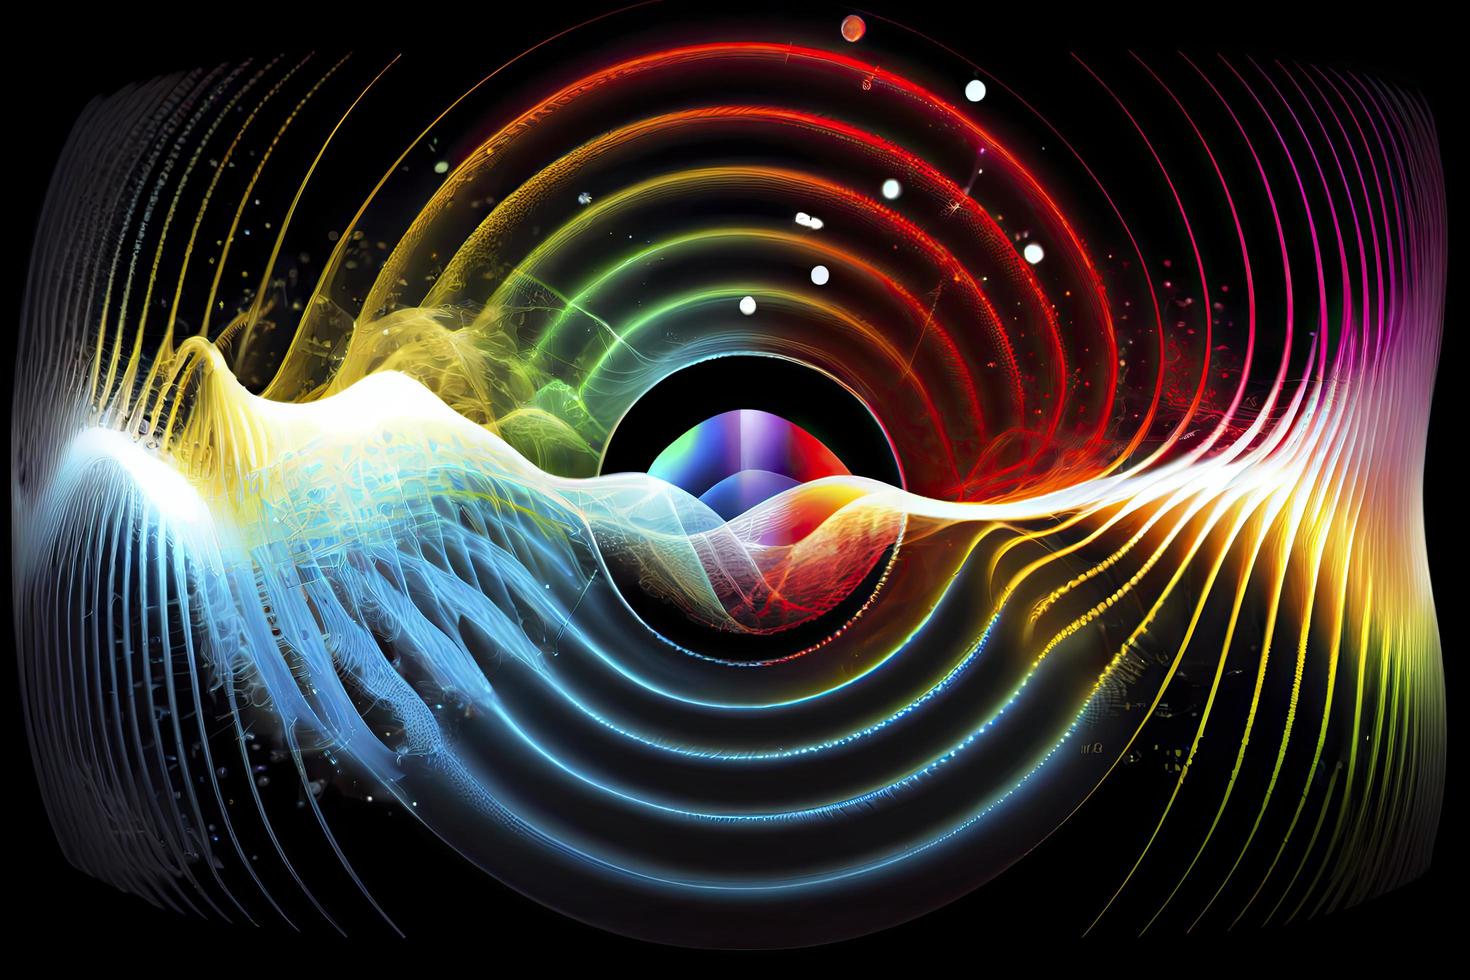 remote viewing of psychic scalar waves in the electromagnetic spectrum photo